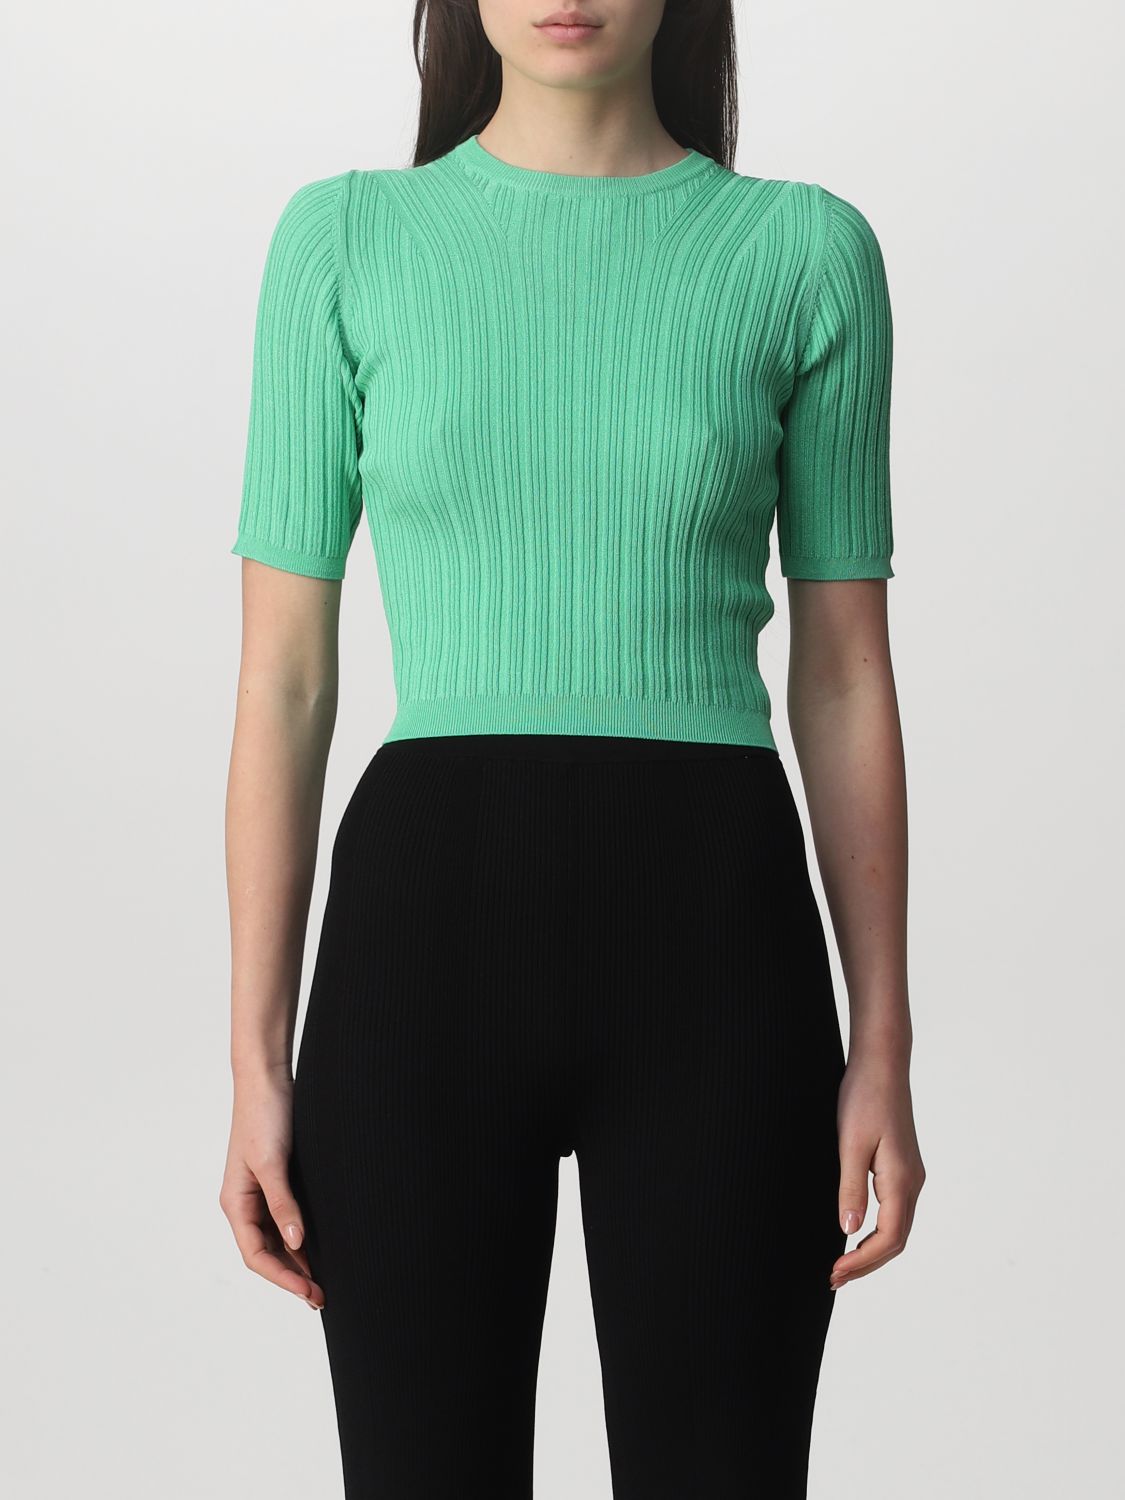 Jersey Remain: Top mujer Remain verde 1